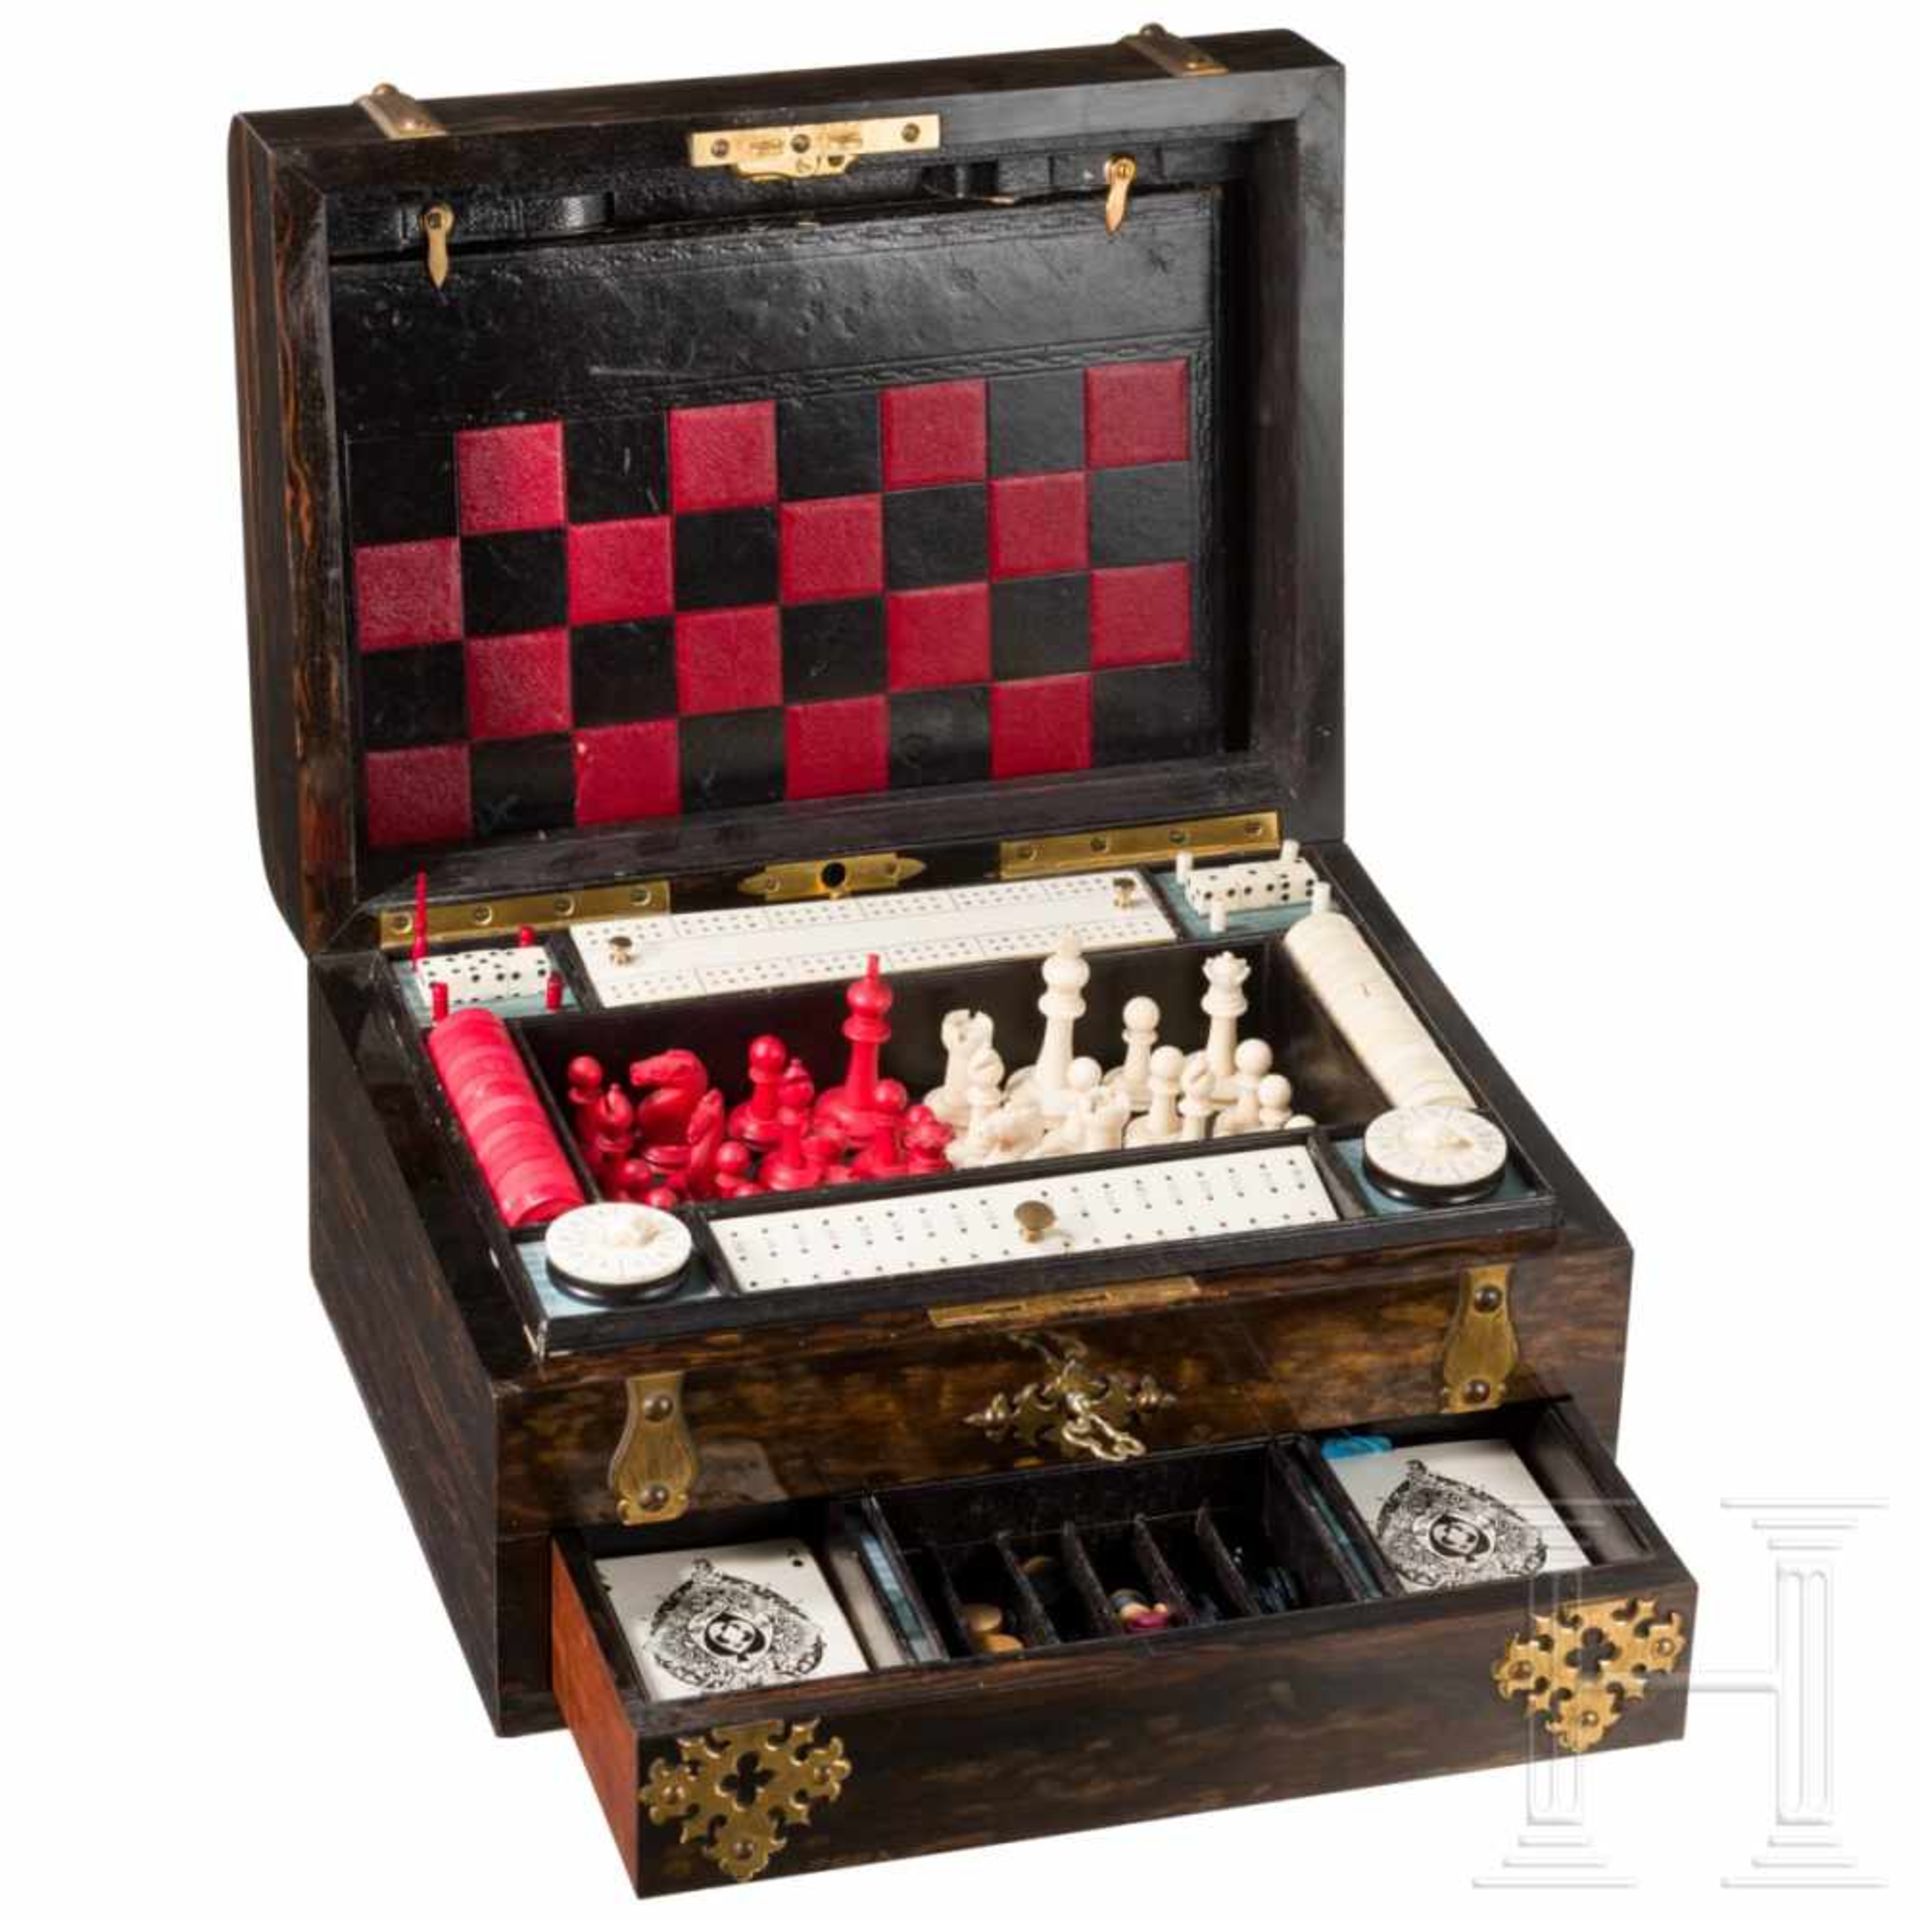 A rare English games compendium belonging to the Krupp family, London, late 19th centuryThe